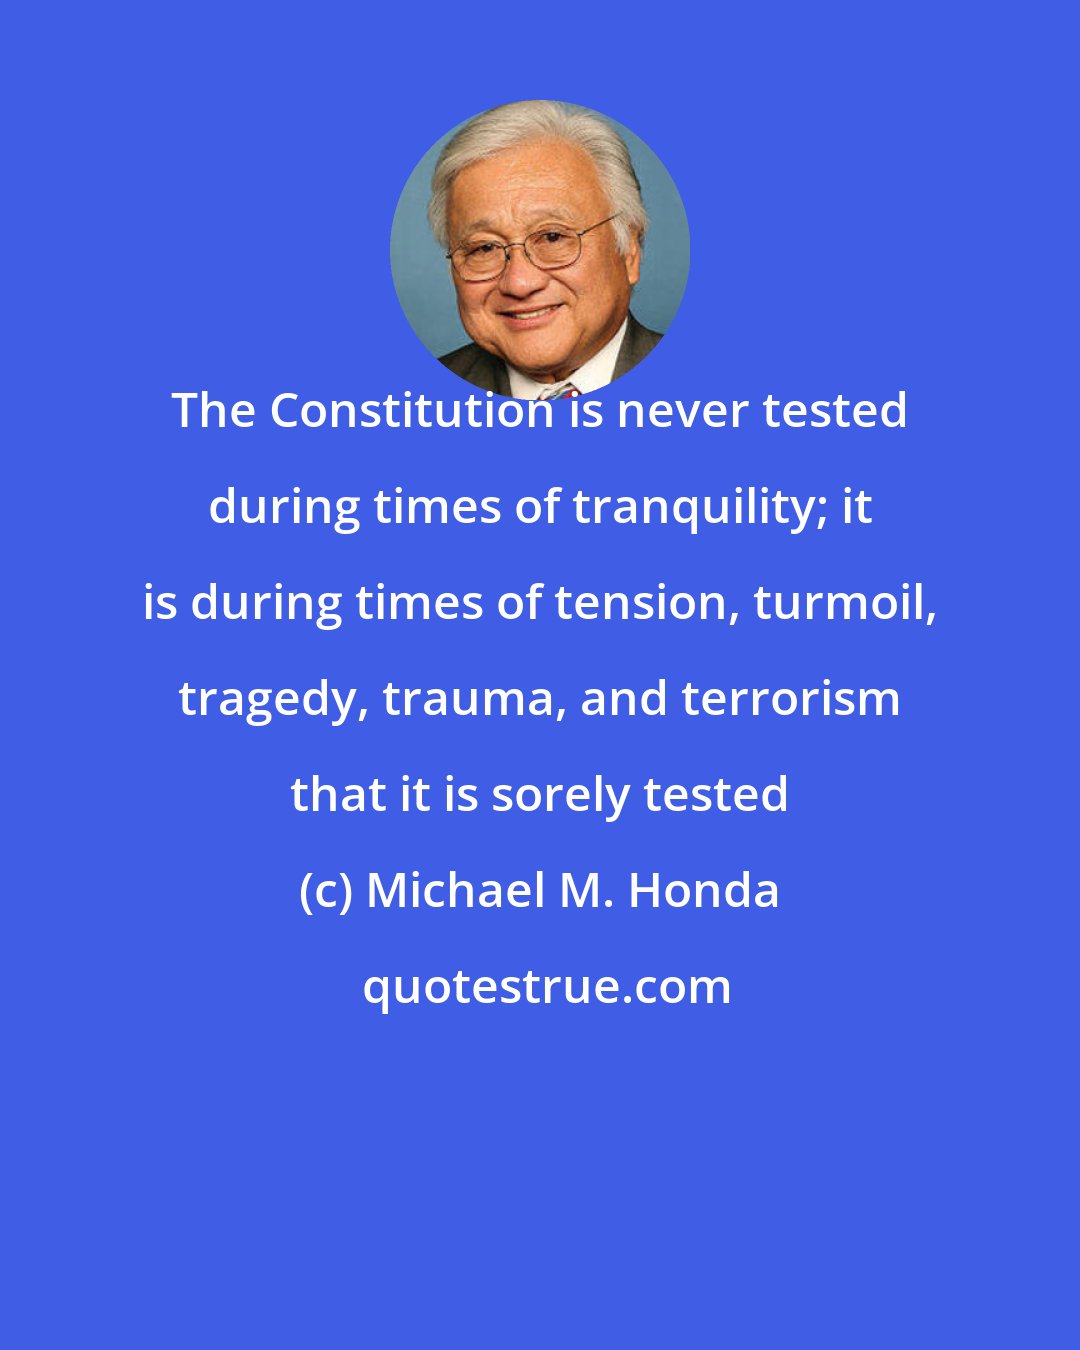 Michael M. Honda: The Constitution is never tested during times of tranquility; it is during times of tension, turmoil, tragedy, trauma, and terrorism that it is sorely tested